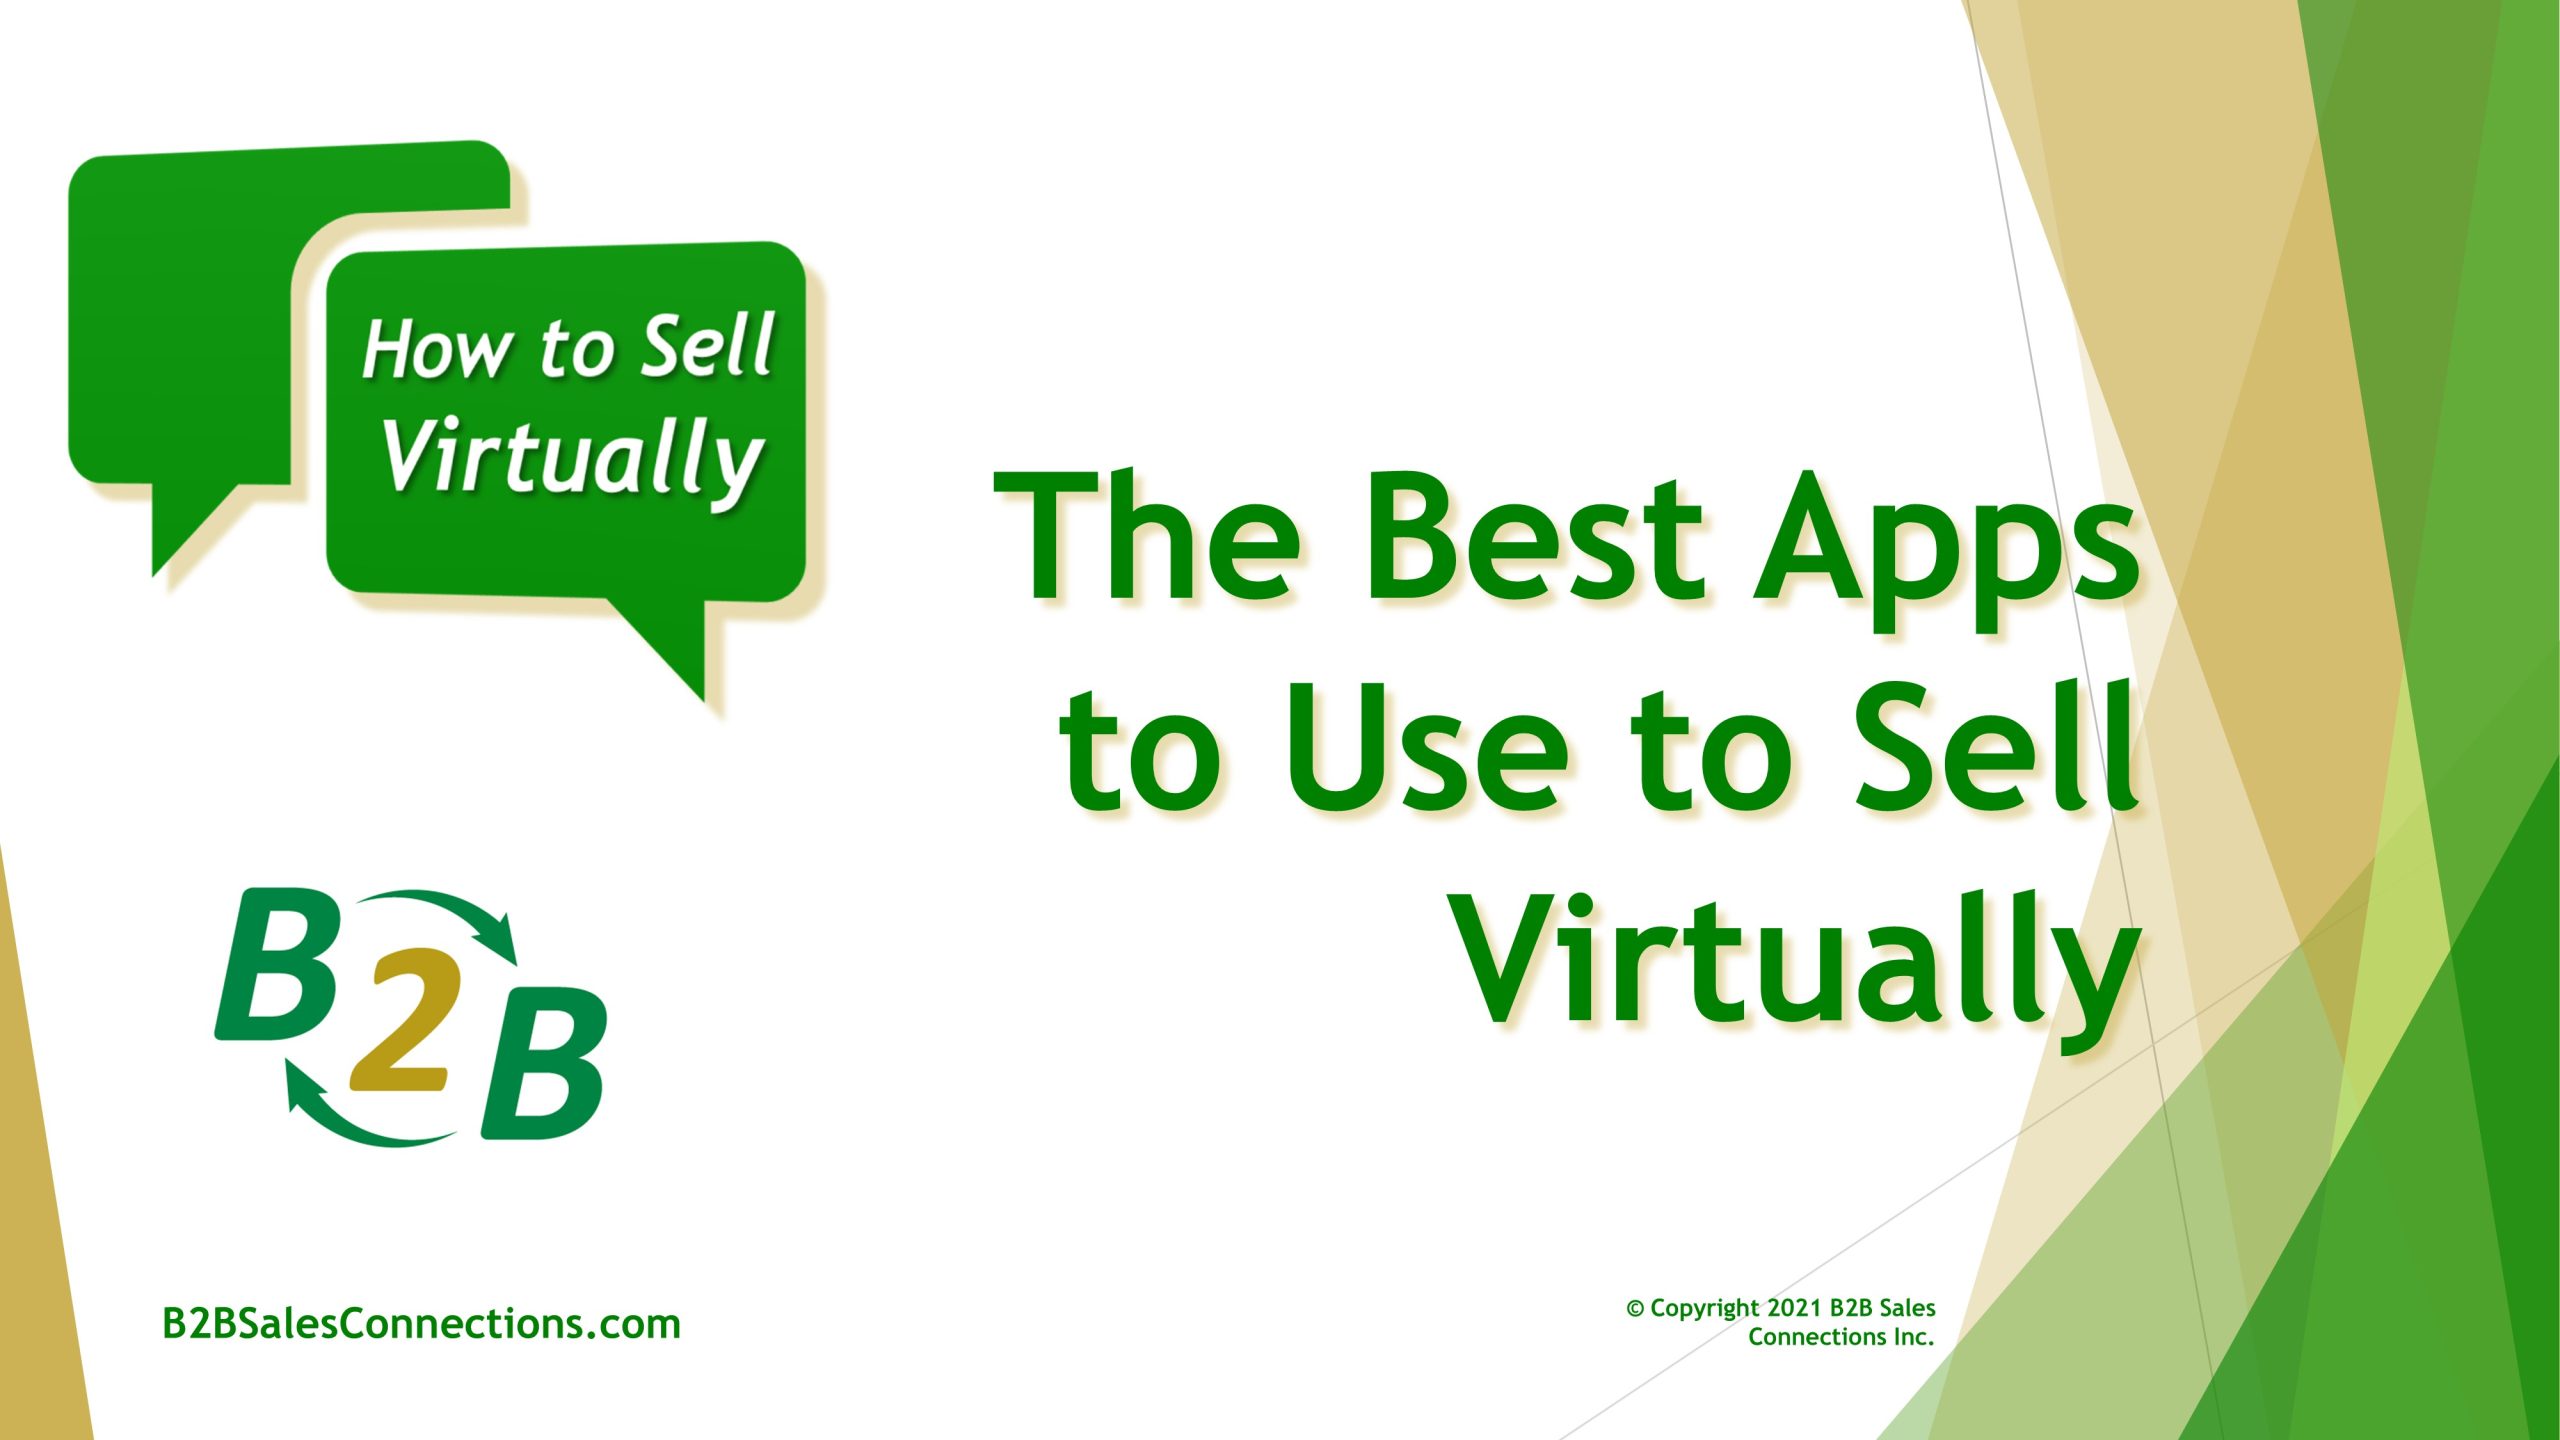 The Best Apps to Use to Sell Virtually